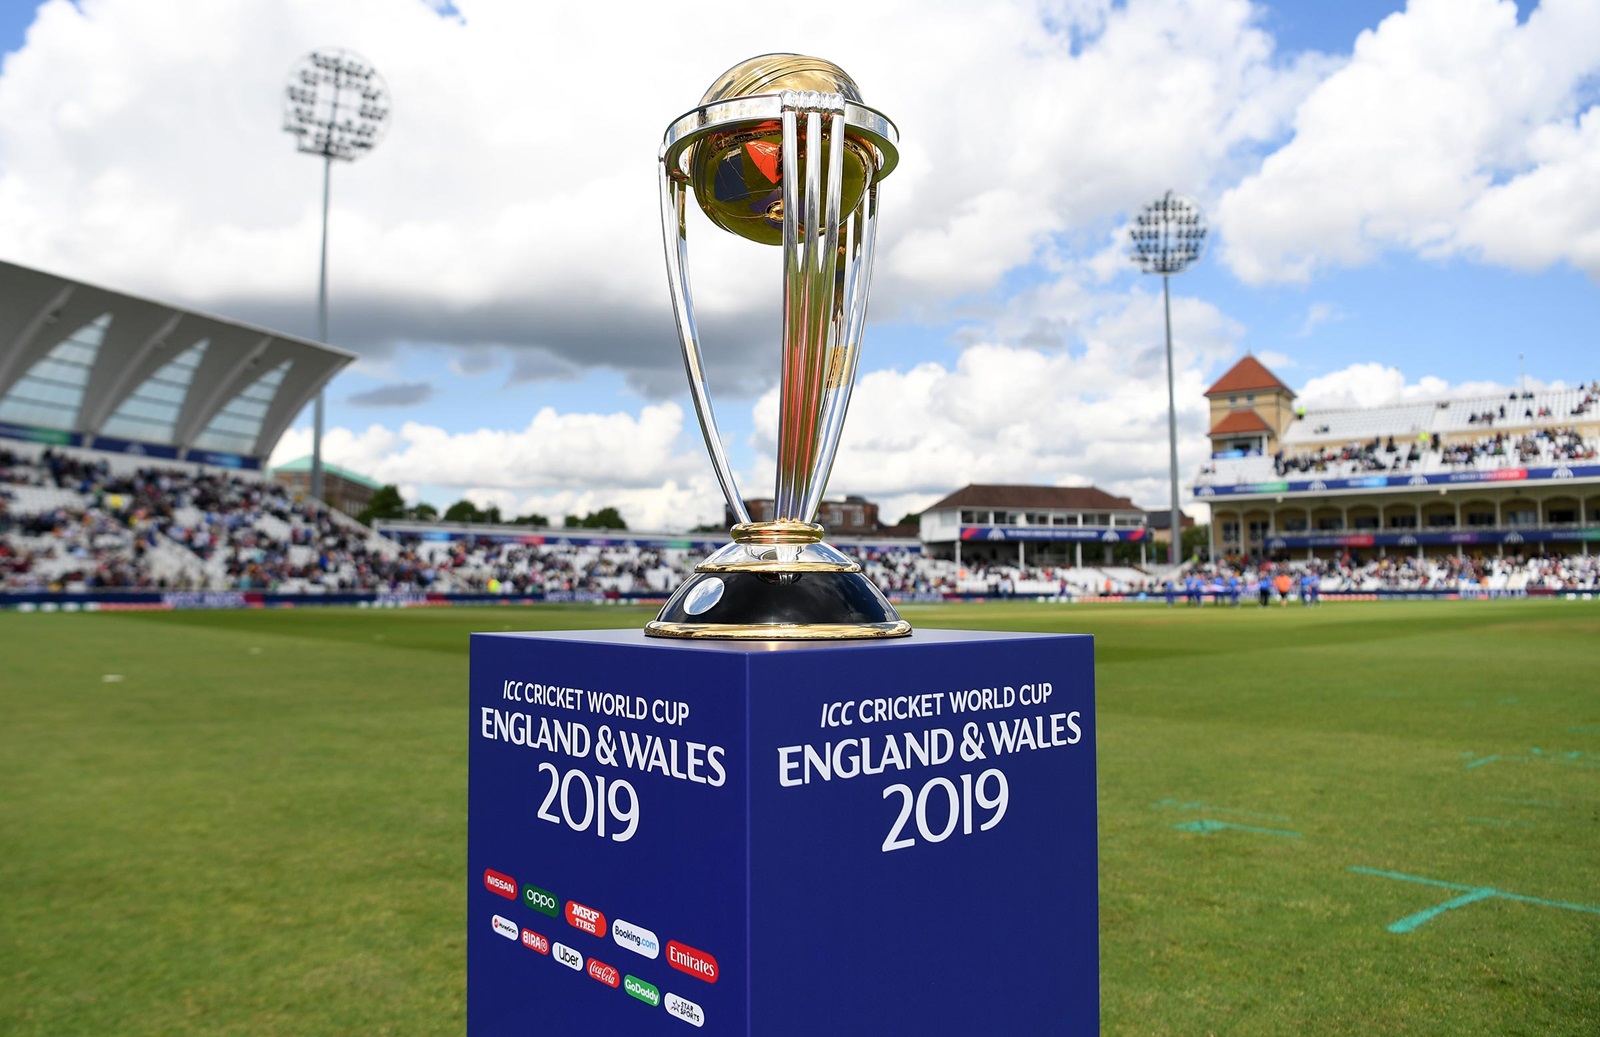 New Zealand set England 242 to win World Cup 2019